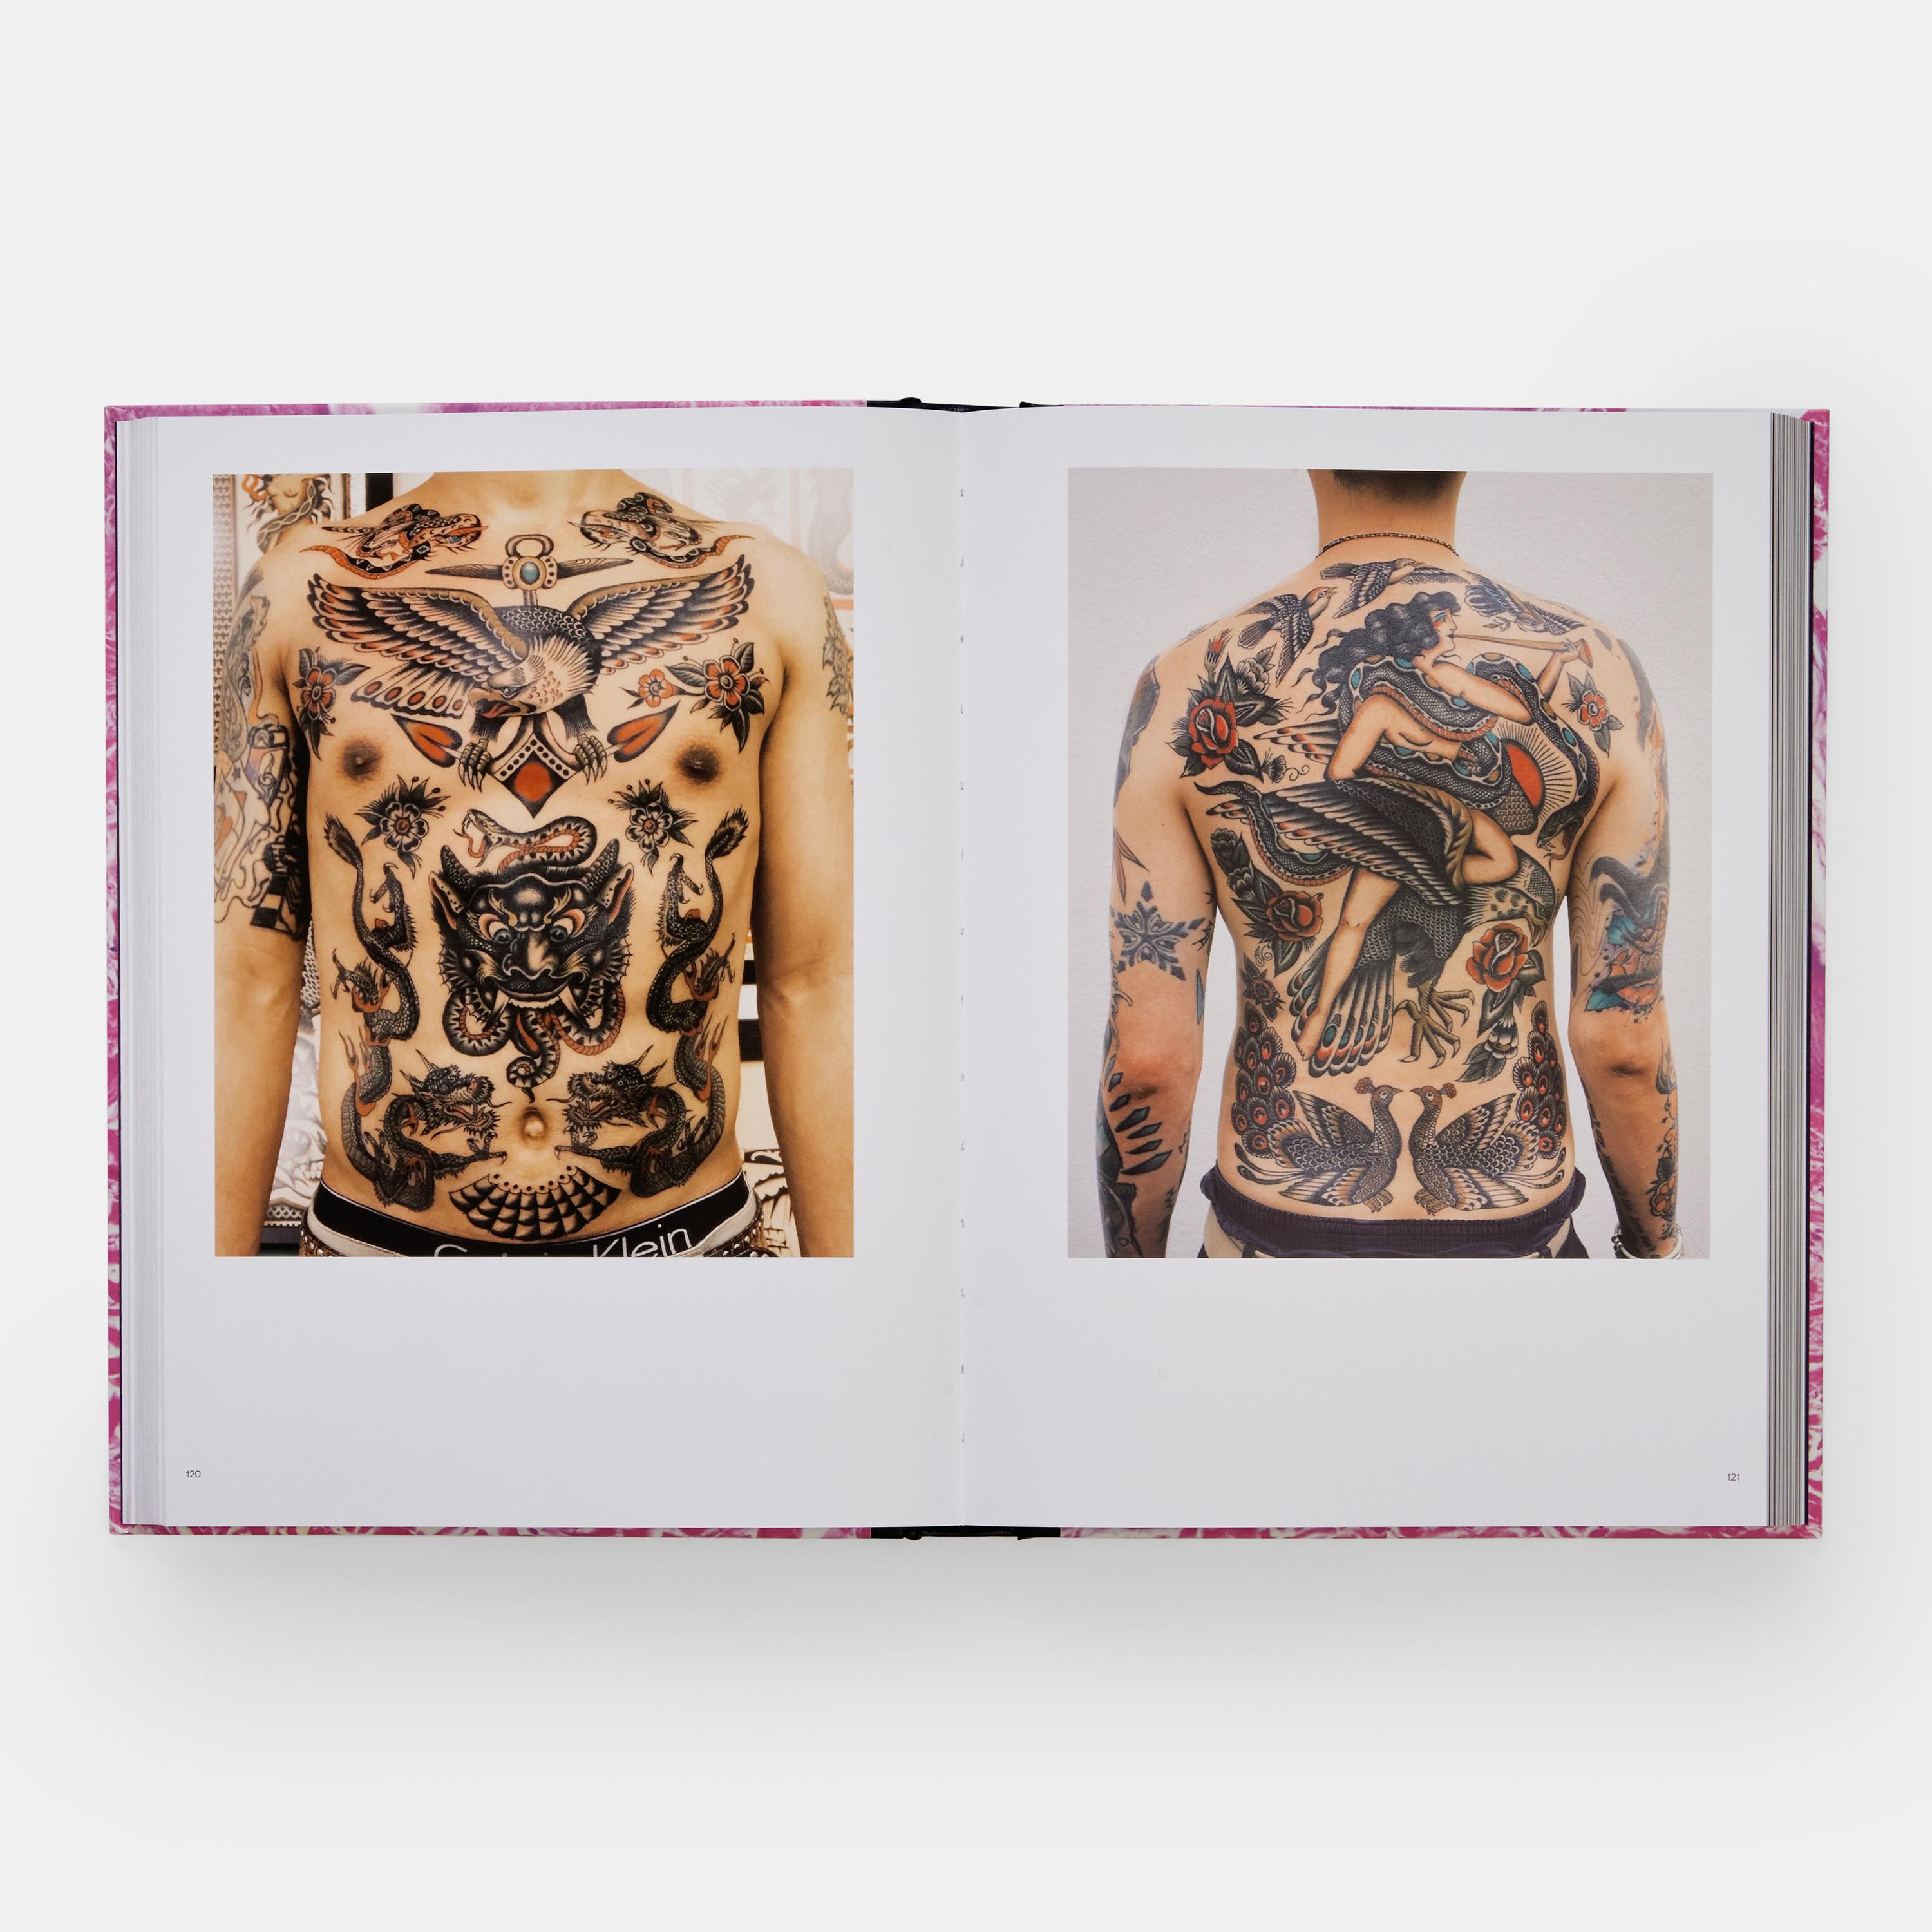 Italian Tattoo You: A New Generation of Artists For Sale